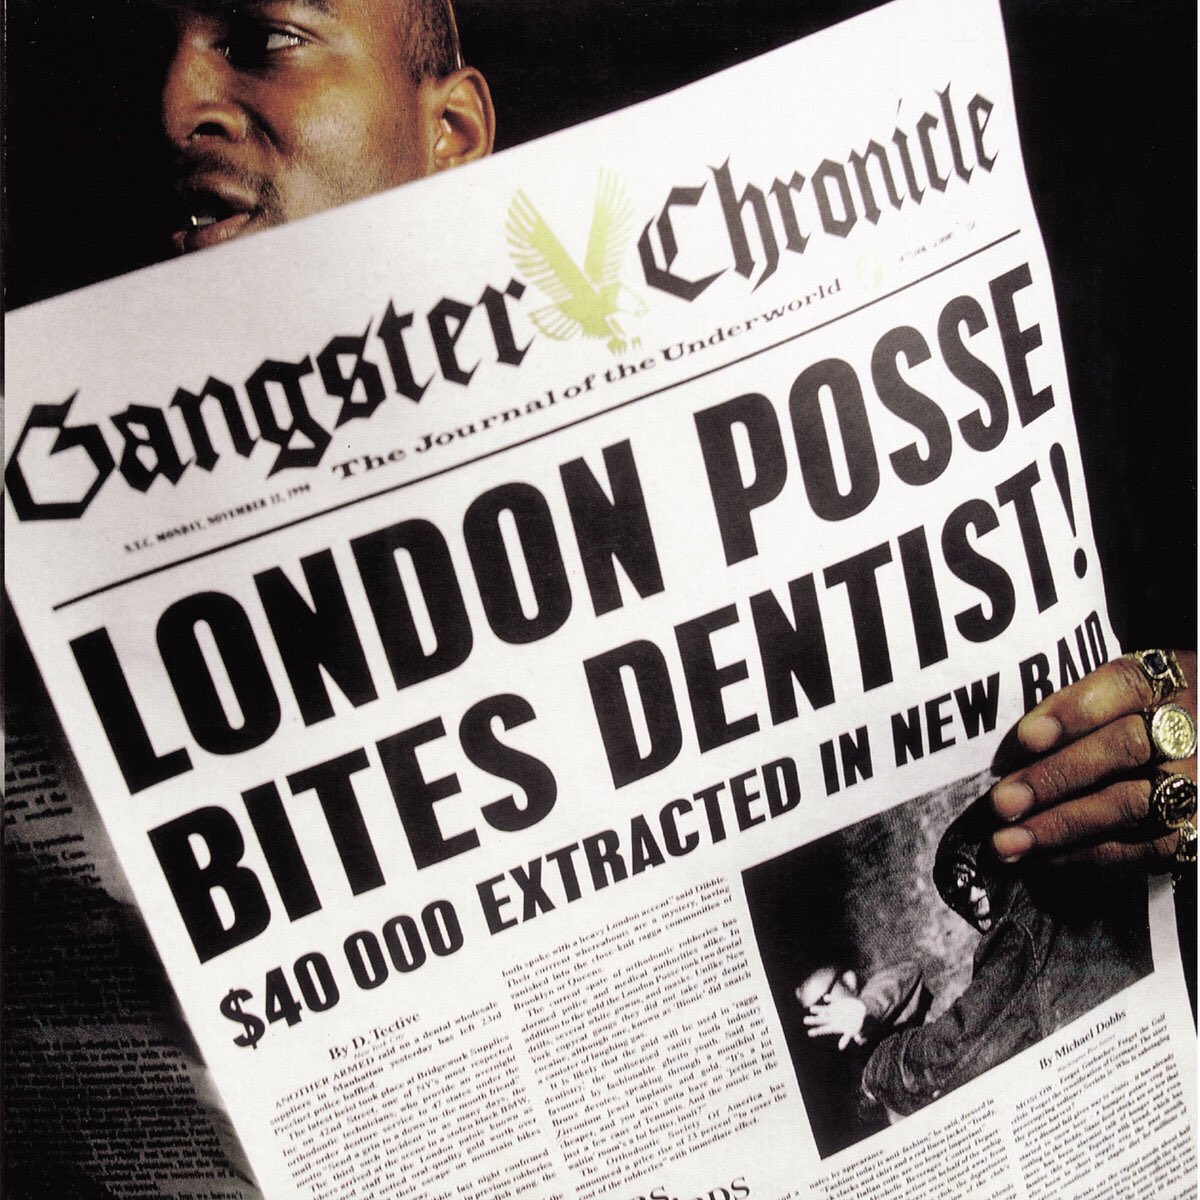 London Posse- Gangster Chronicles: The Definitive CollectionAn early ‘grime album’, The London Posse wear their Garage and Reggae background on their sleeve here. That makes for is a sound that isn’t quite recognisable of grime today, setting it apart from the rest of the list